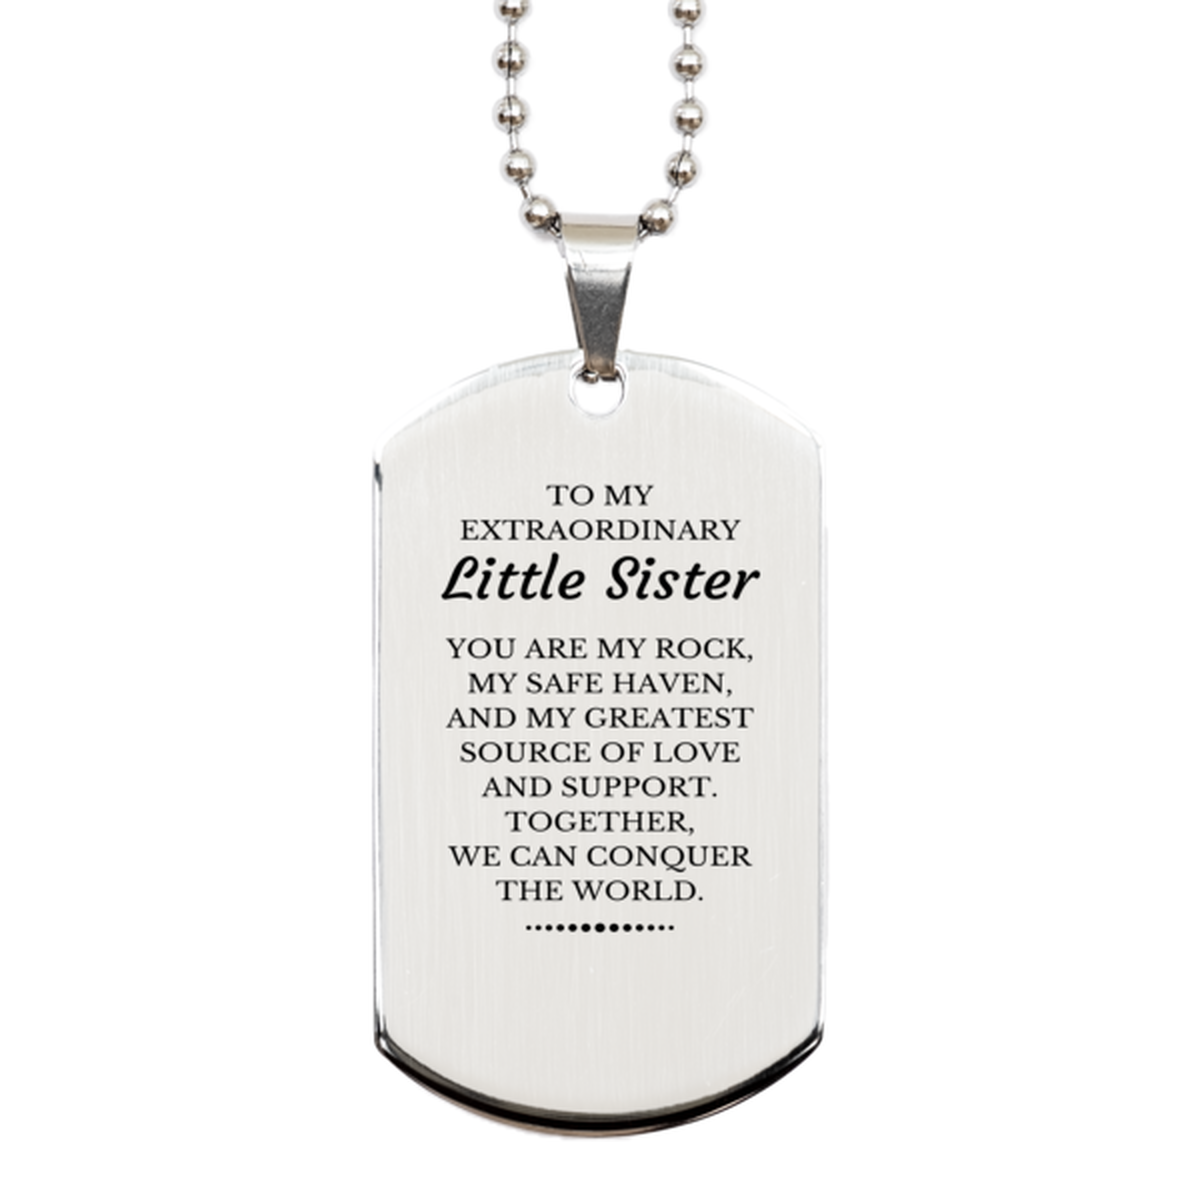 To My Extraordinary Little Sister Gifts, Together, we can conquer the world, Birthday Silver Dog Tag For Little Sister, Christmas Gifts For Little Sister